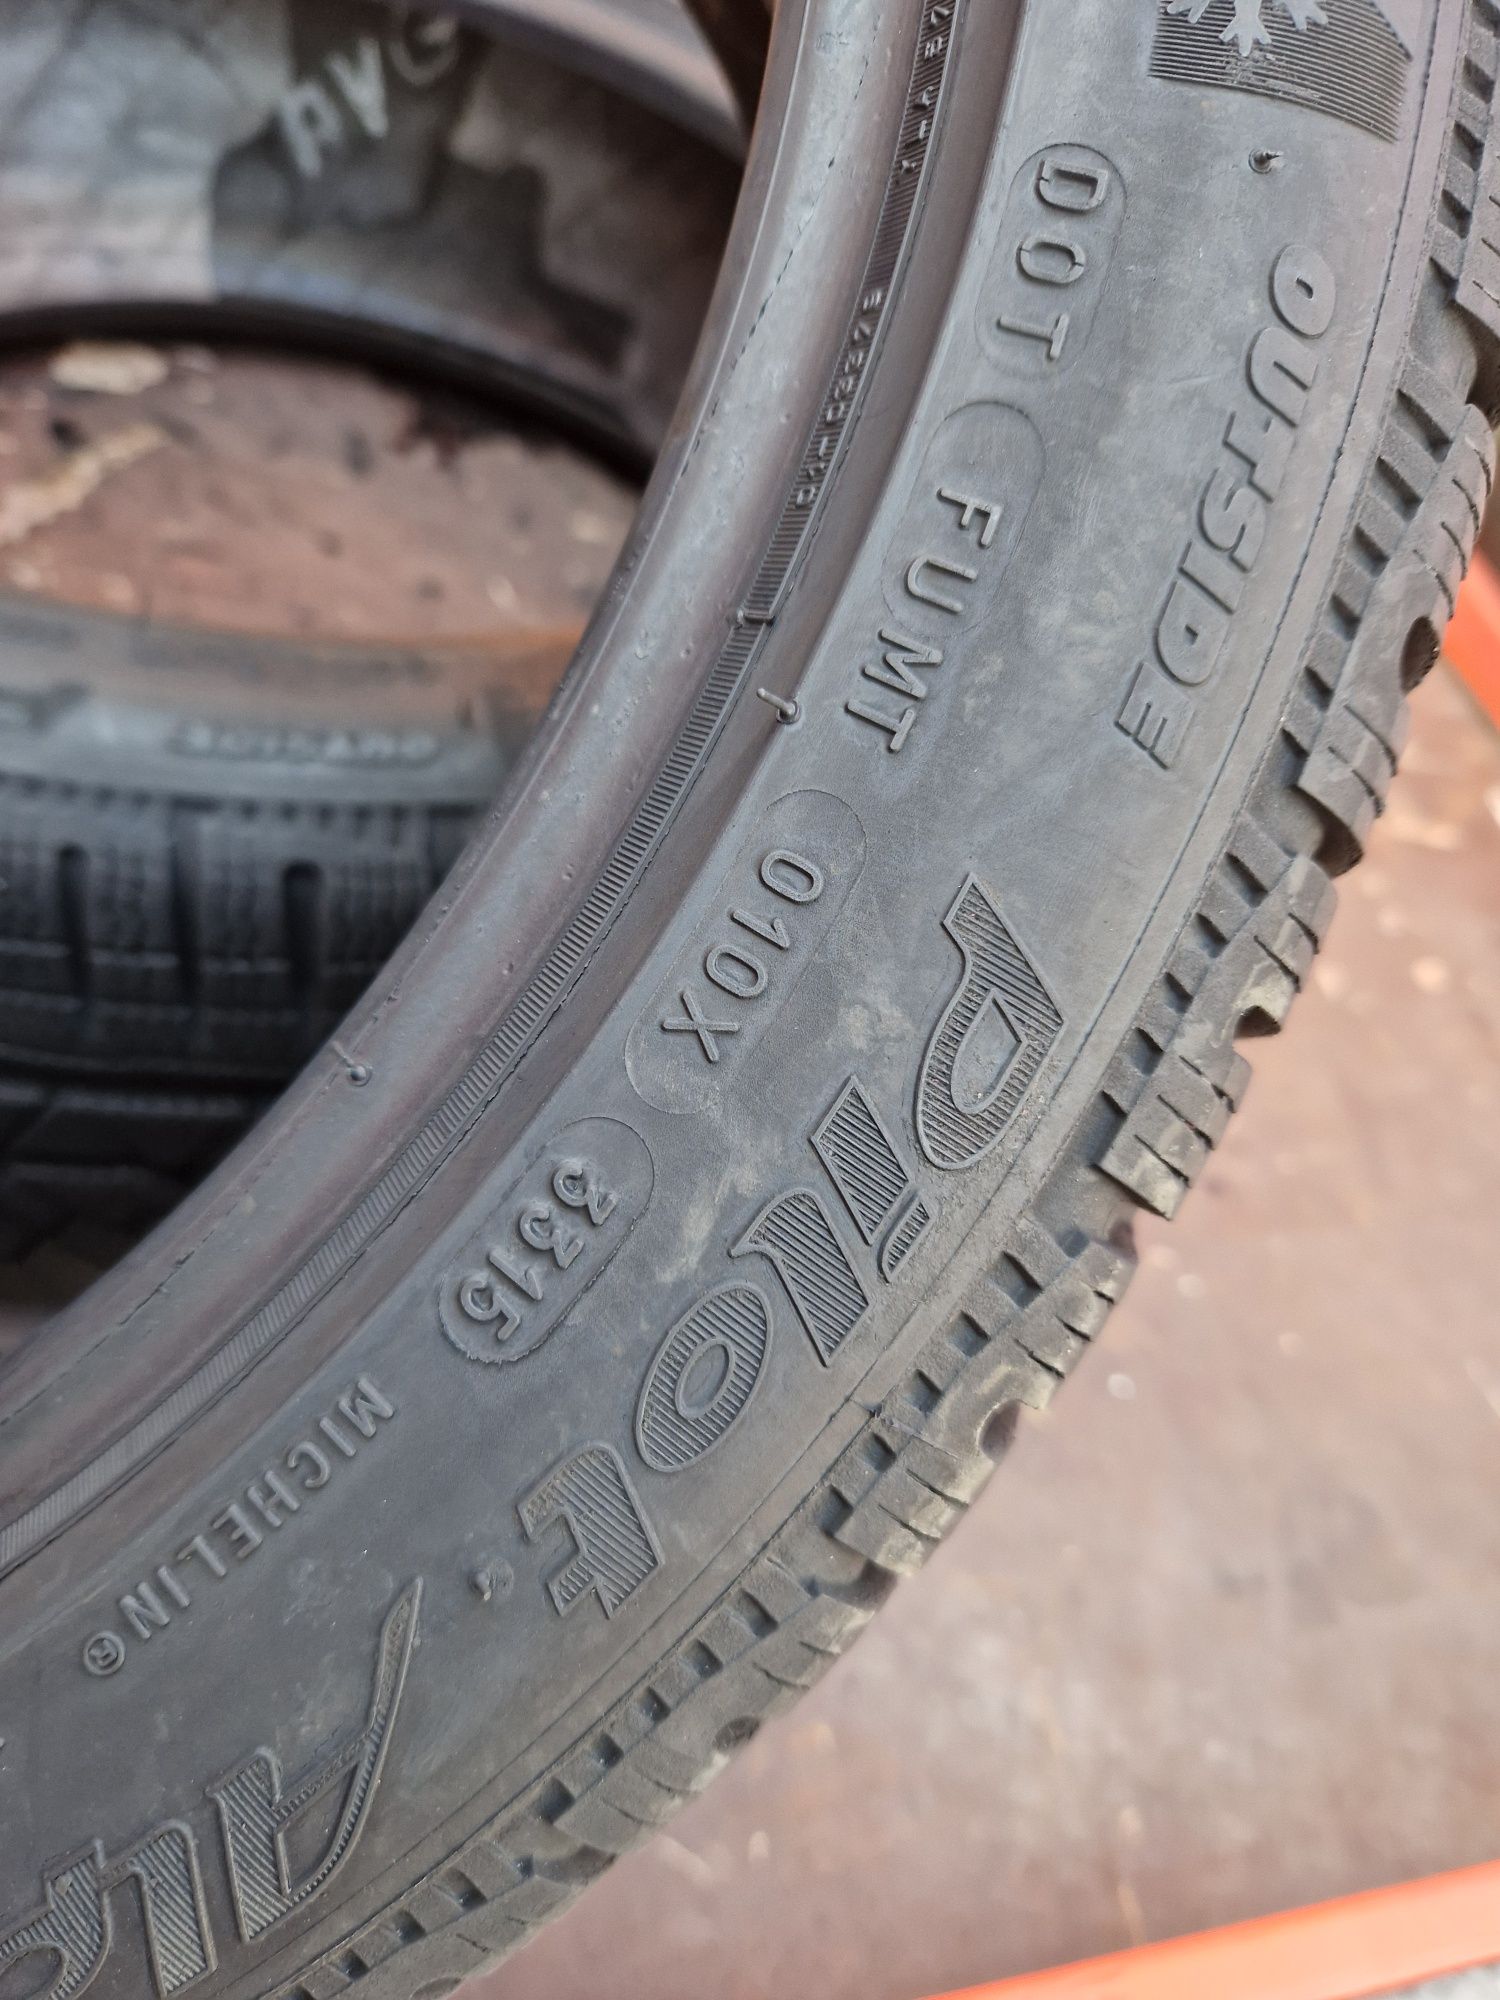 2 Anvelope Michelin  225 45 R18 M+S